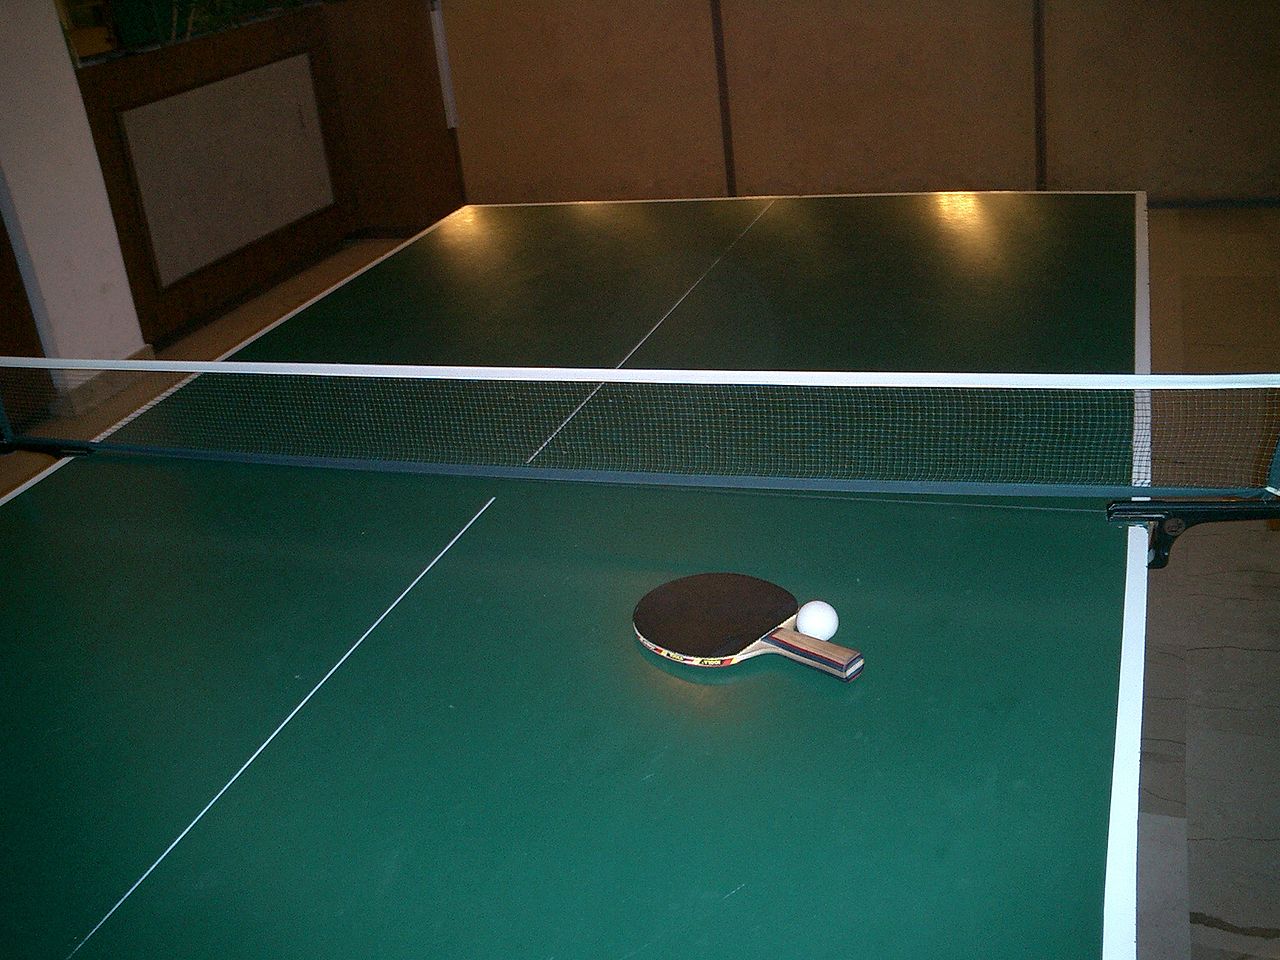 tenis stołowy ping pong - West Brom 4ever - CC:Wikimedia Commons